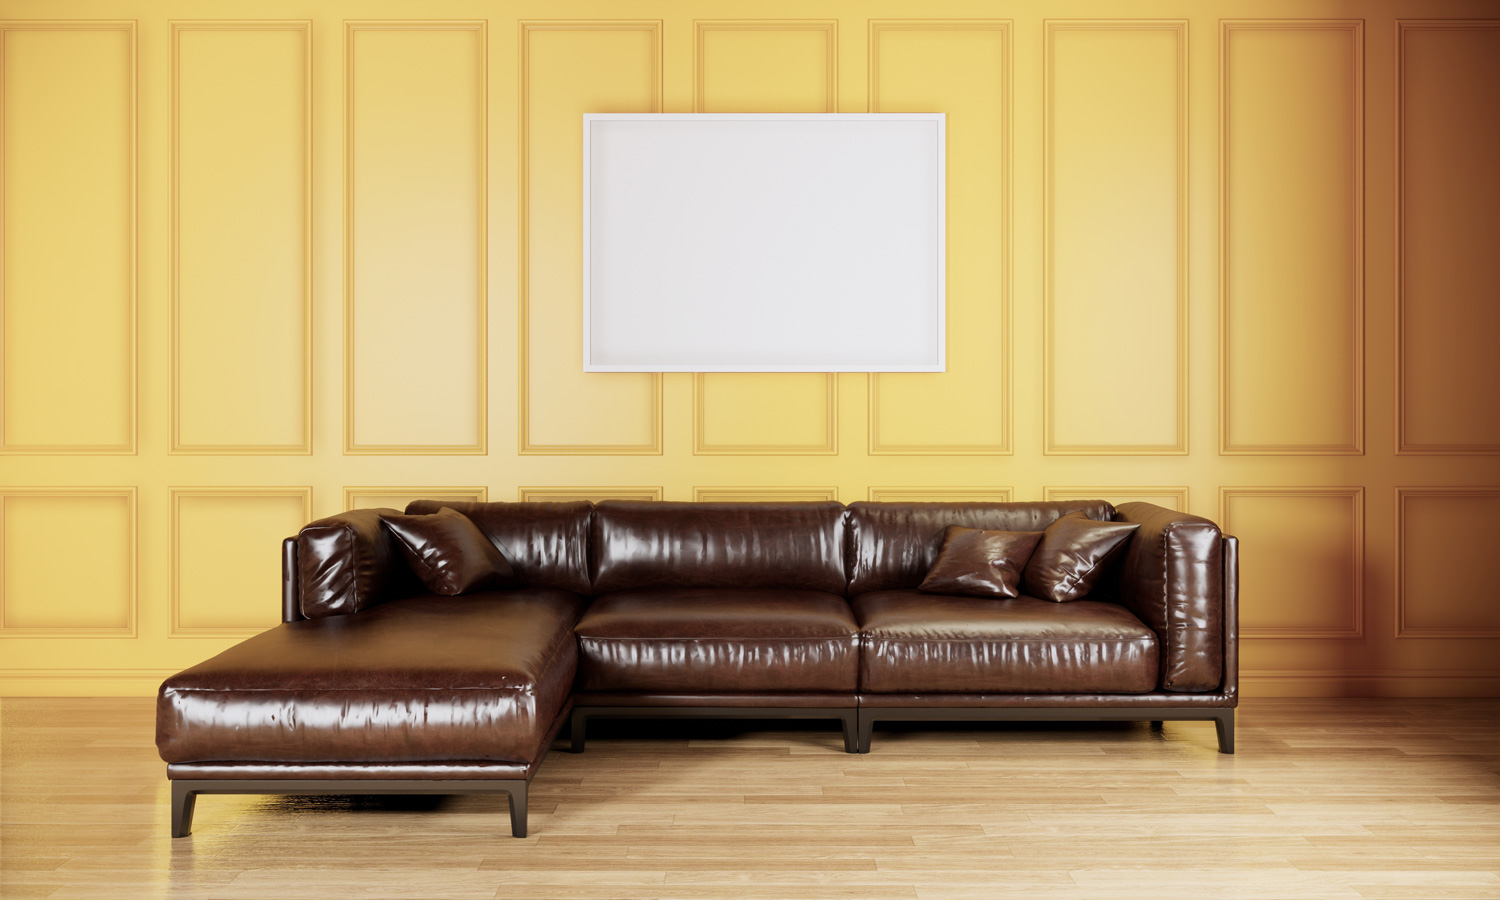 Blank picture frame mock up in yellow room interior with leather sofa, 